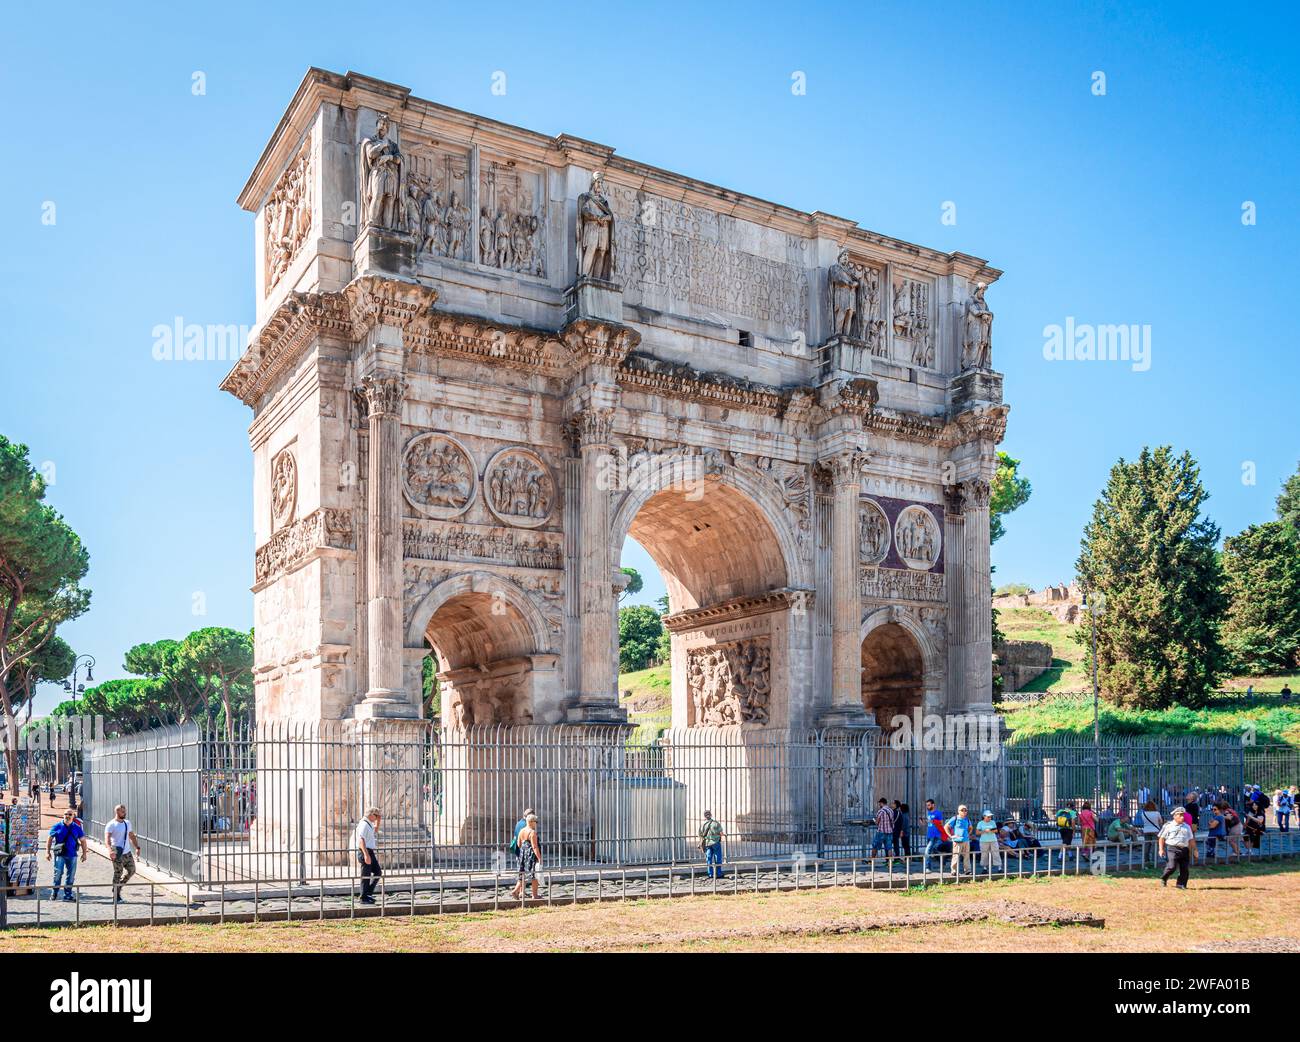 The Arch of Constantine, a triumphal arch dedicated to the emperor Constantine the Great. Rome, Italy. Stock Photo